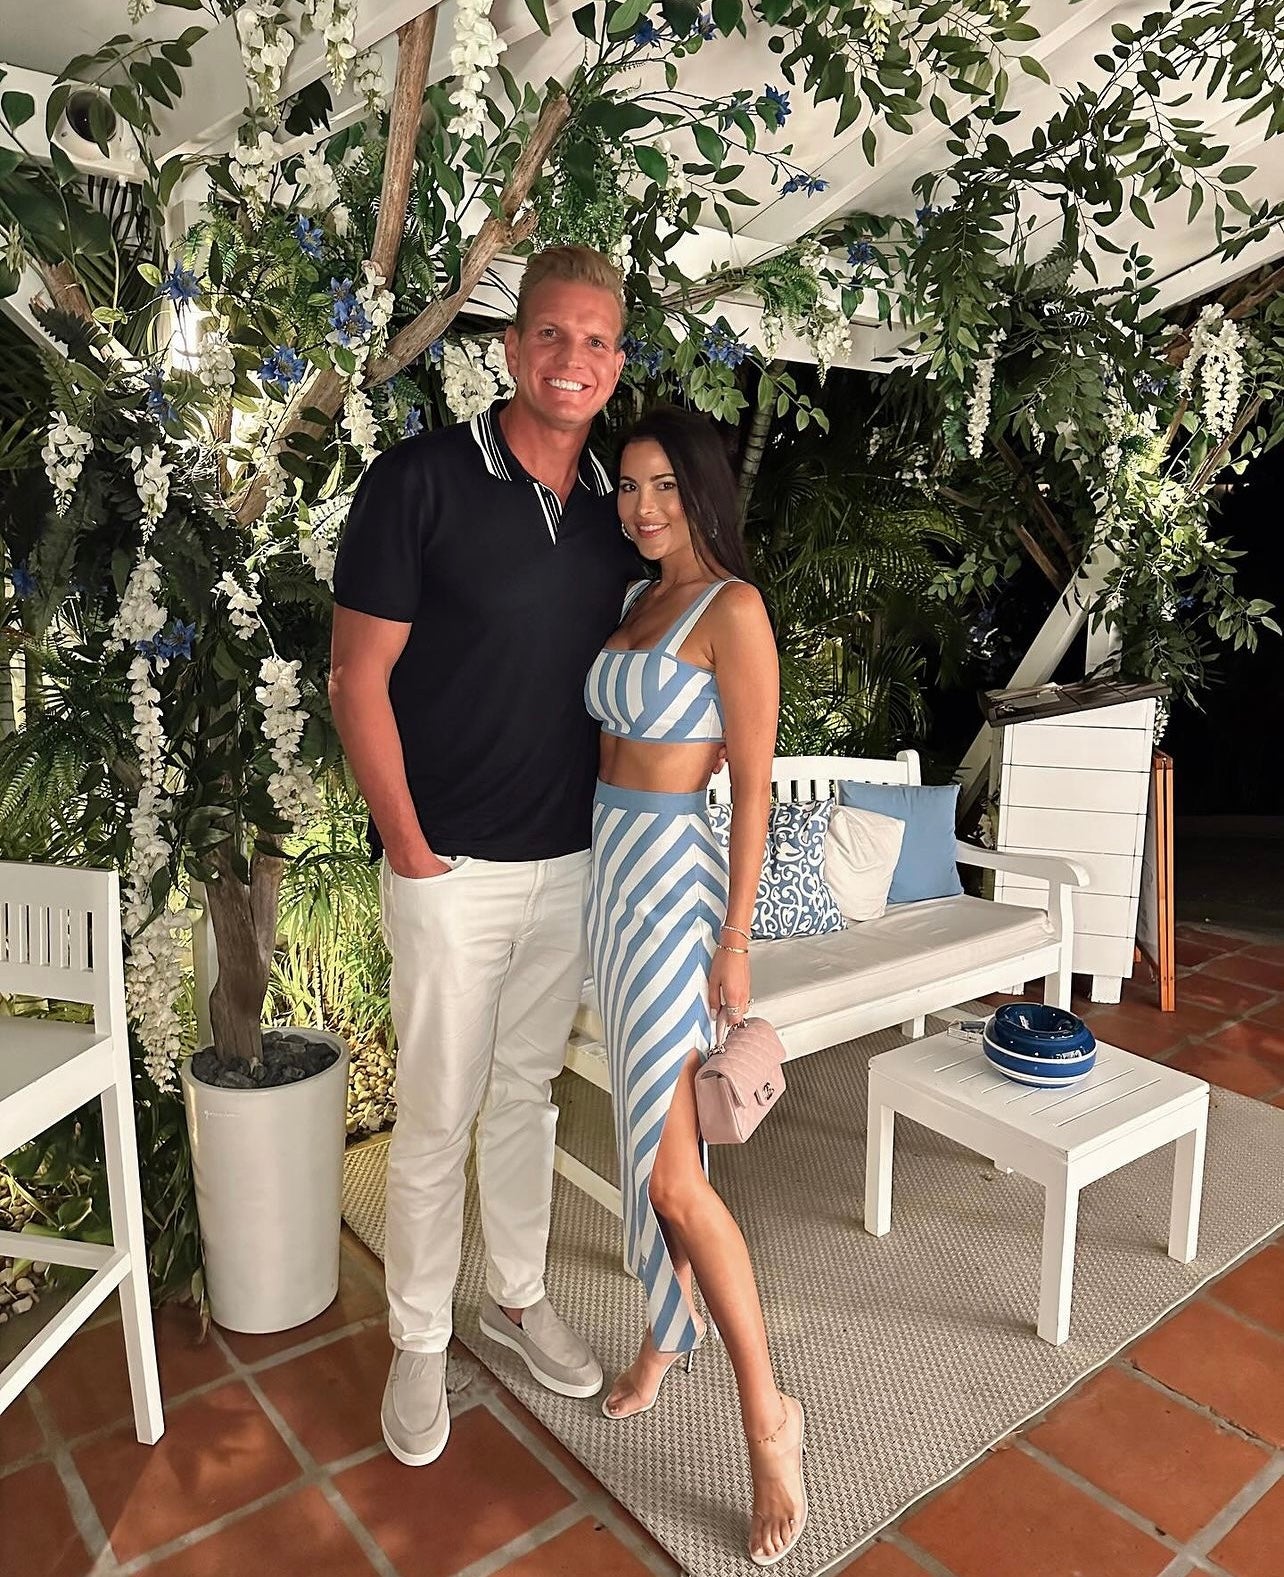 Our Romantic Getaway to St. Barths